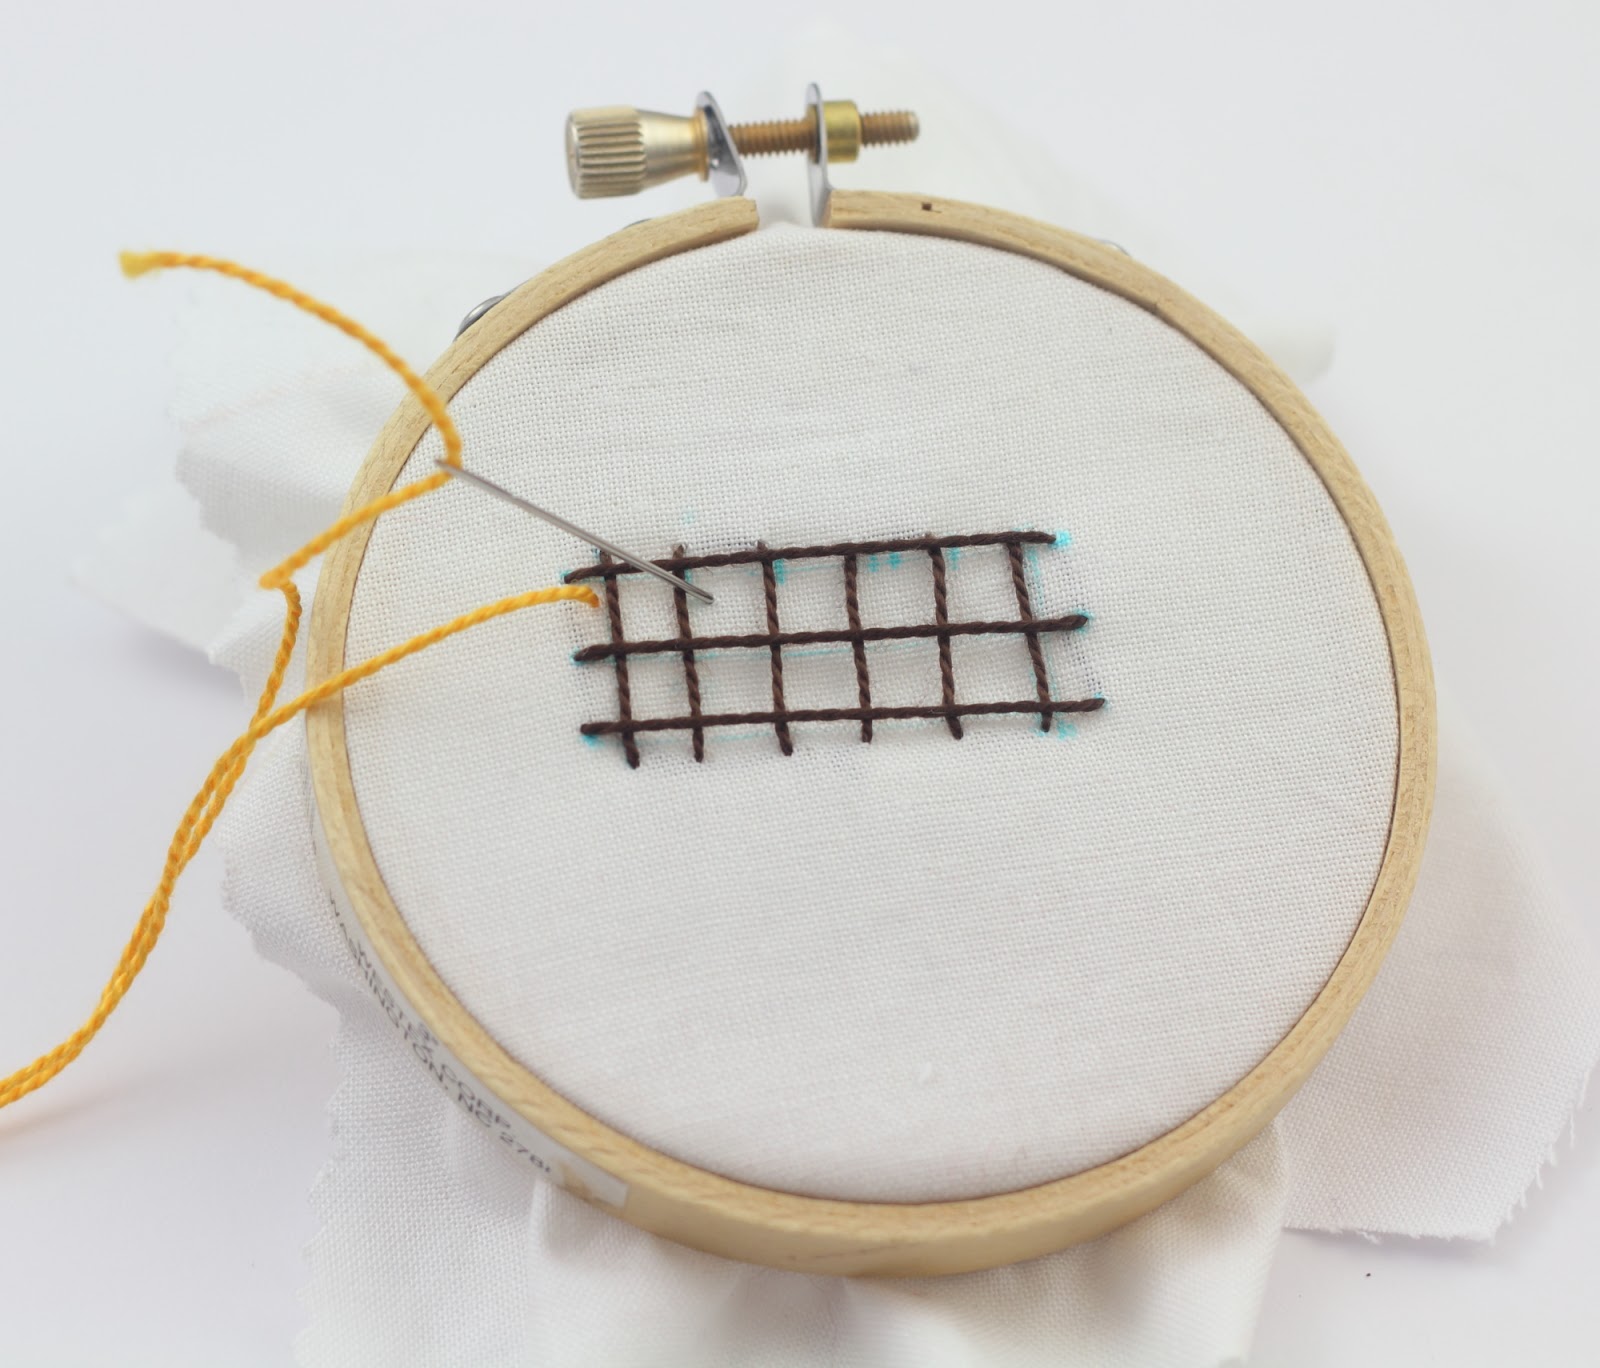 How to do the Plaid Filling Stitch - Sarah's Hand Embroidery Tutorials